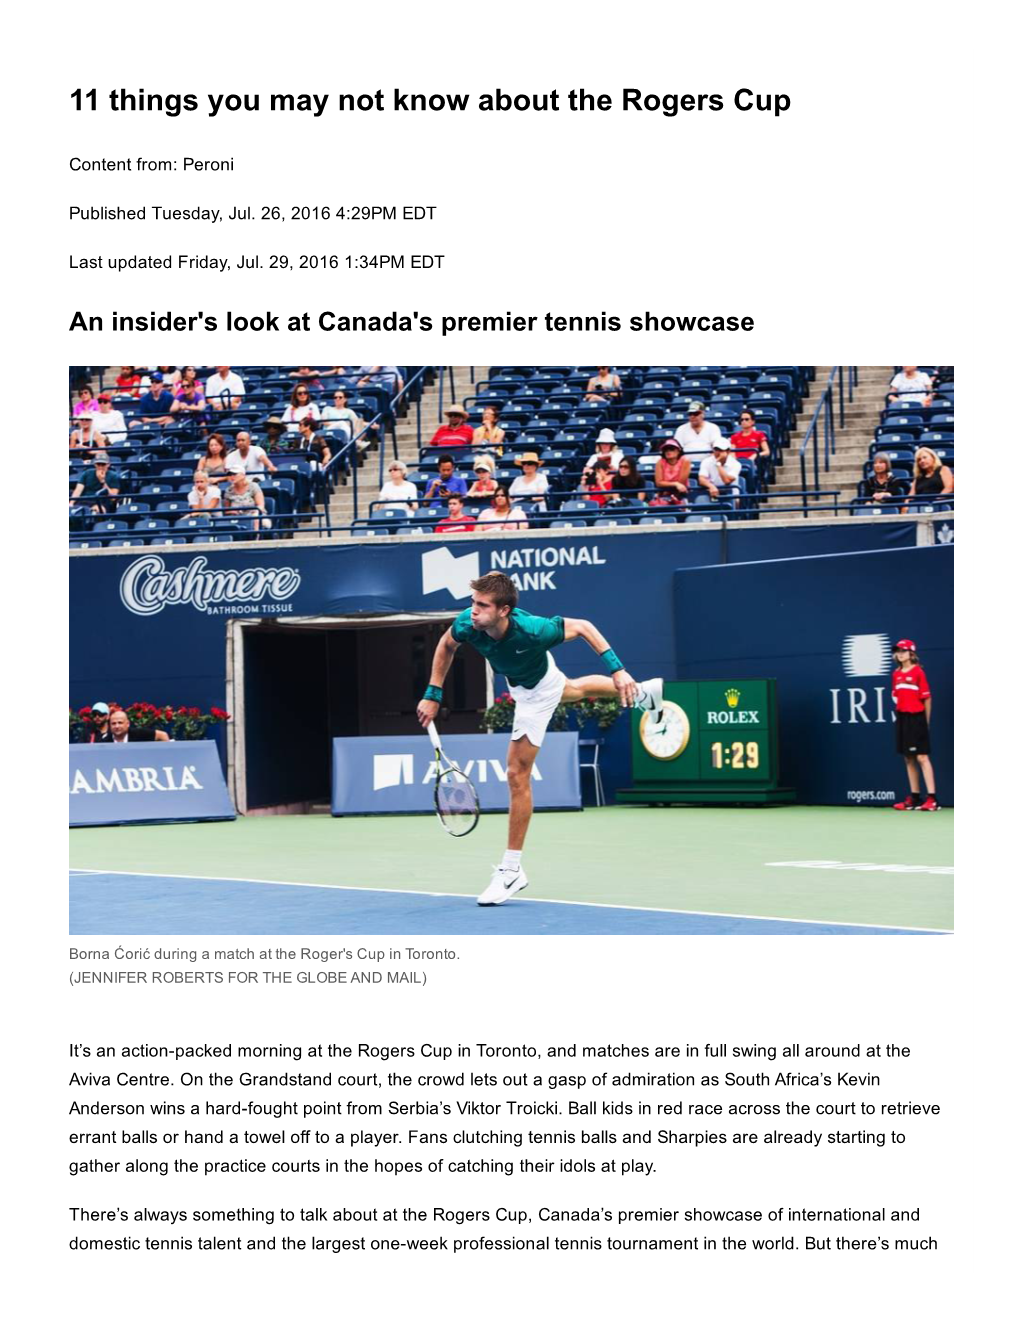 11 Things You May Not Know About the Rogers Cup